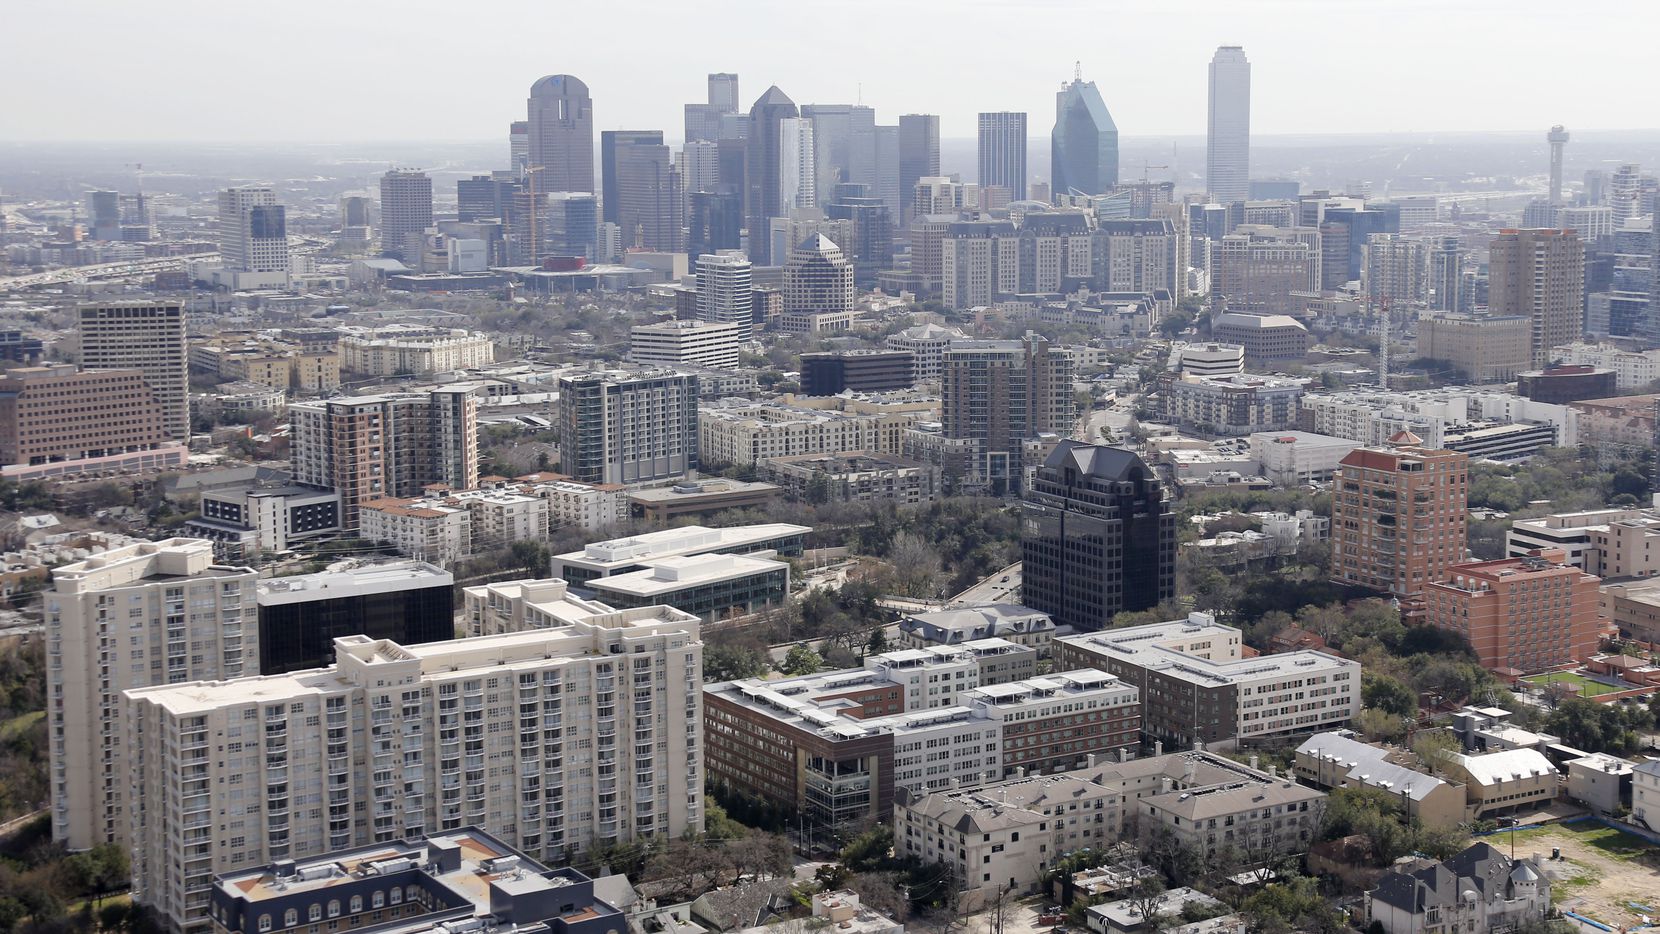 Apartment, condominium and office complexes in the Uptown, Oak Lawn, Turtle Creek and Cedar Springs areas north of downtown Dallas were photographed in February.